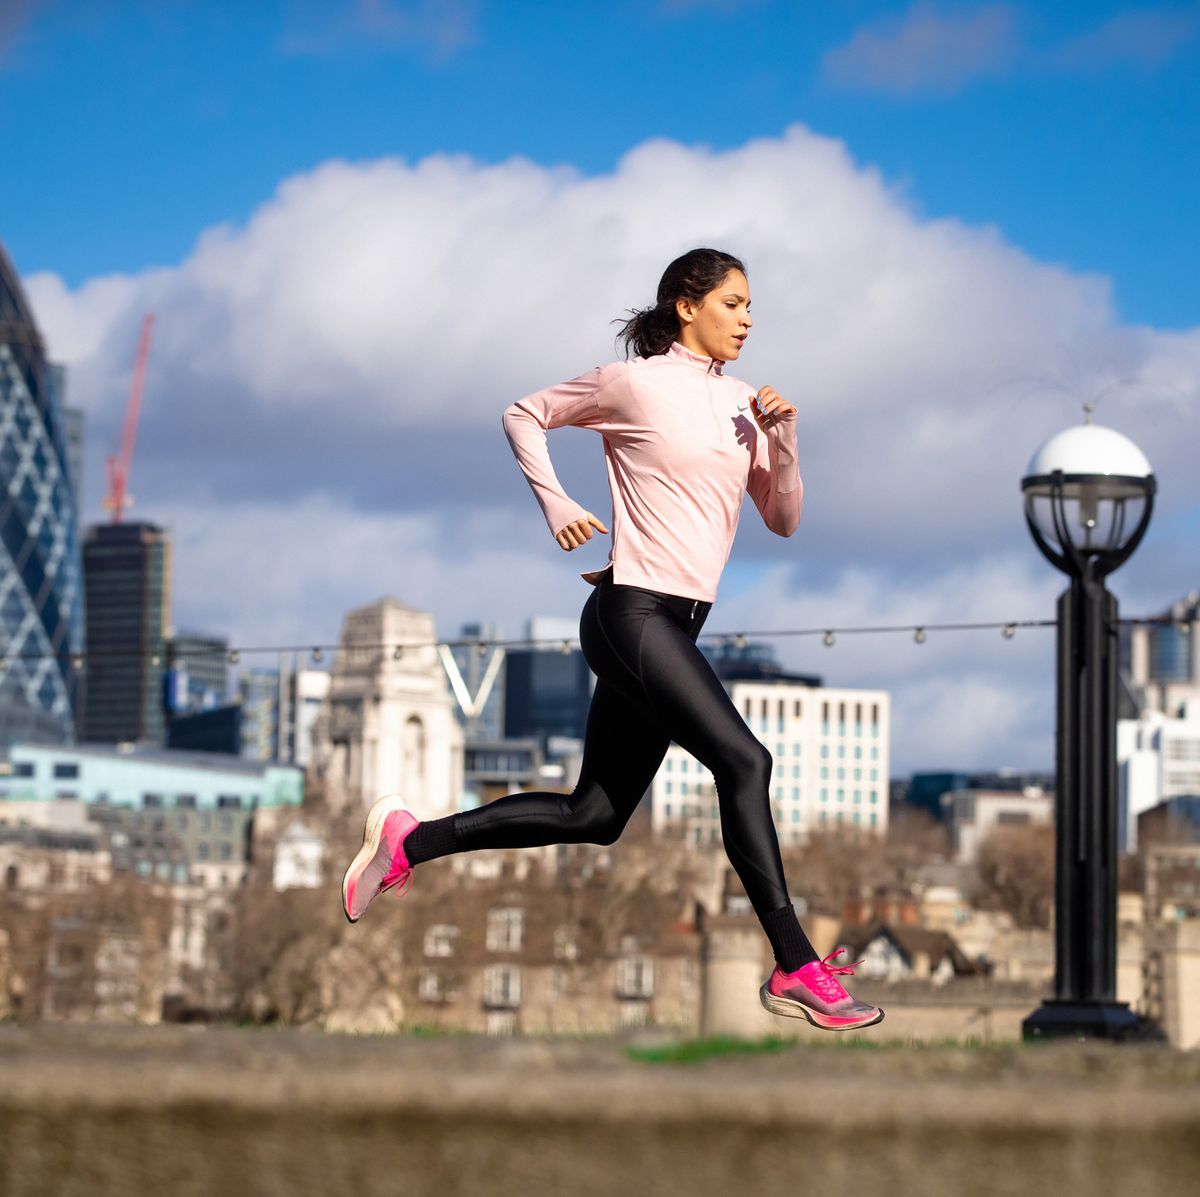 https://hips.hearstapps.com/hmg-prod/images/young-woman-jogging-in-the-city-of-london-royalty-free-image-1709469472.jpg?crop=0.668xw:1.00xh;0.168xw,0&resize=1200:*